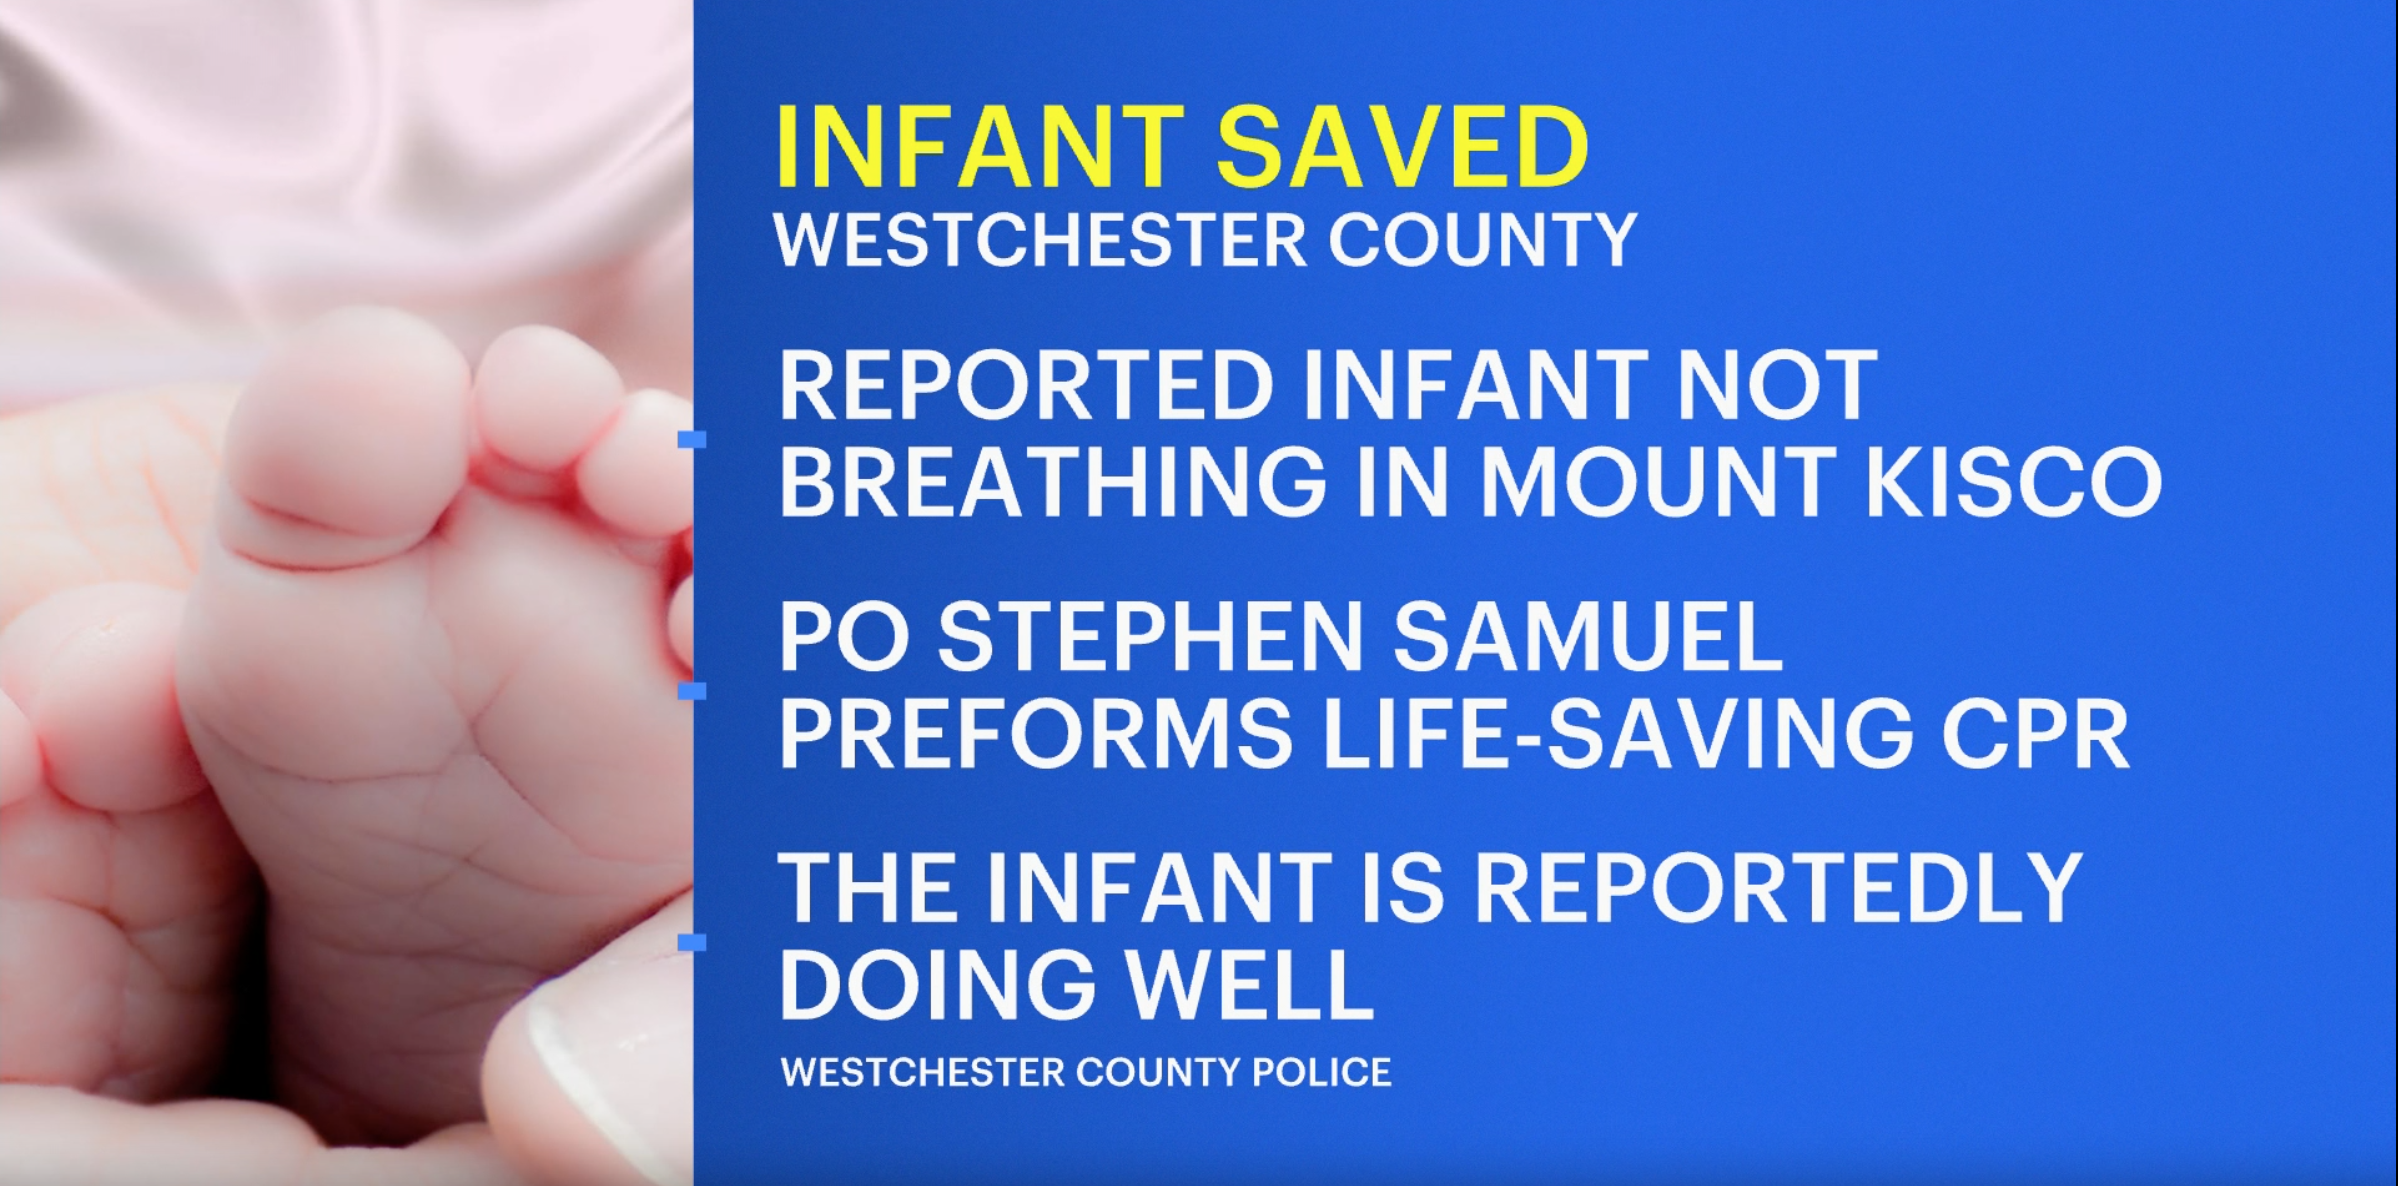 Westchester County police officer praised for saving infant's life